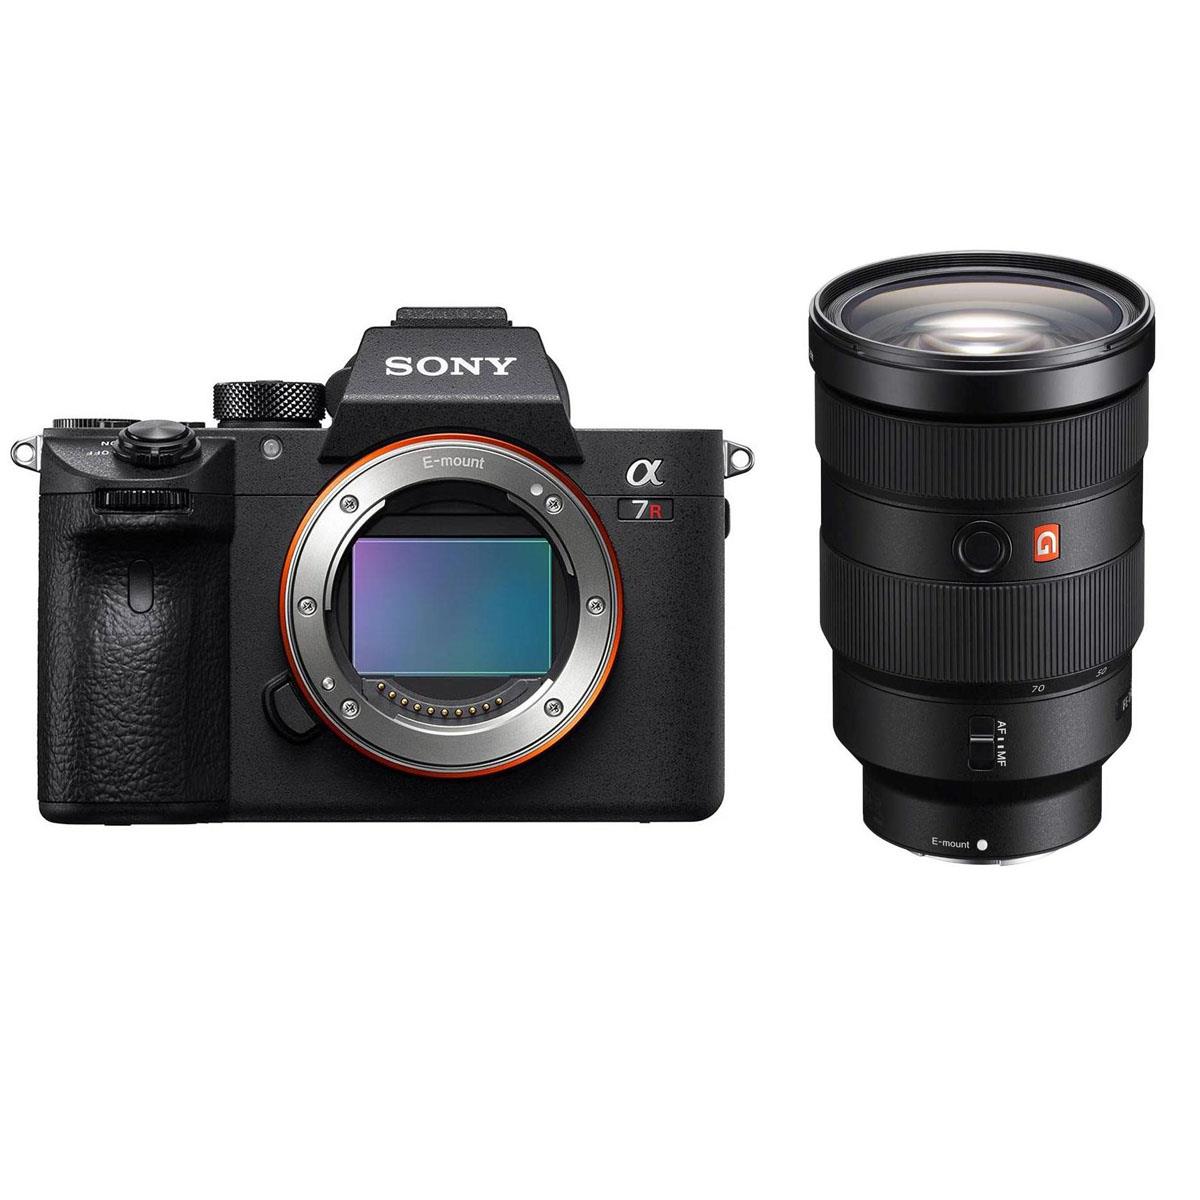 Image of Sony Alpha a7R III Mirrorless Camera (V2) with FE 24-70mm f/2.8 GM Lens